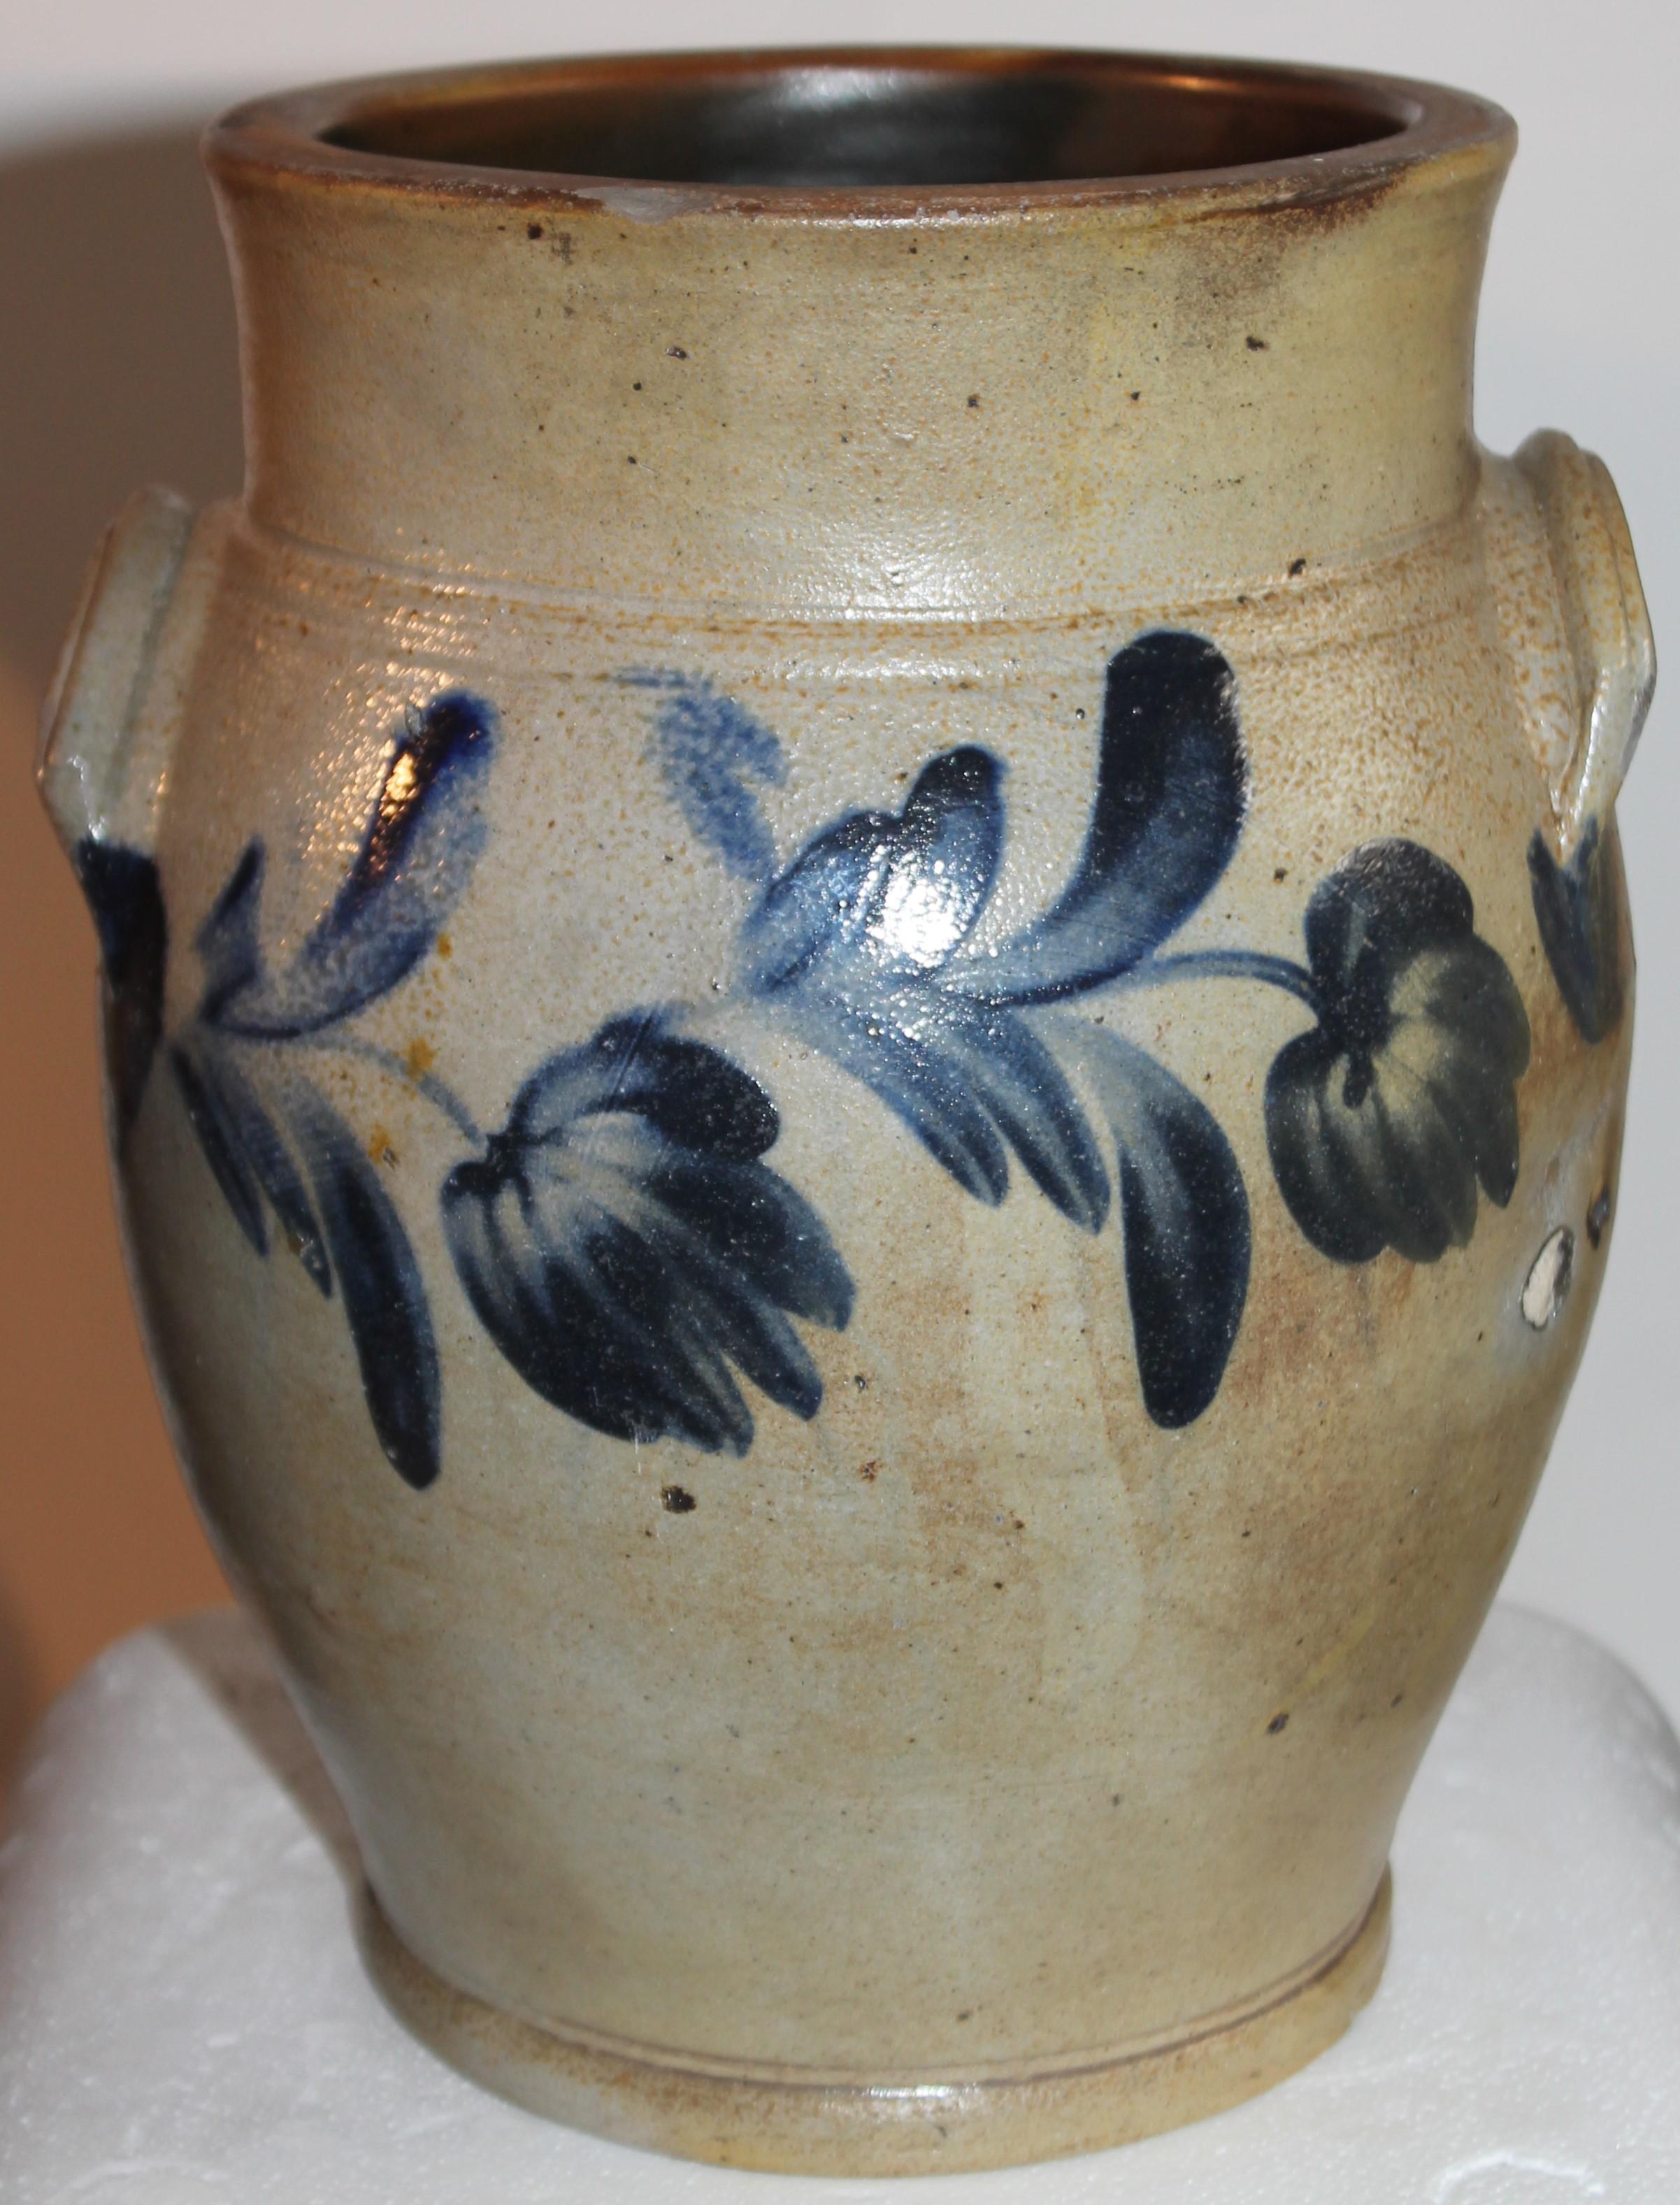 This fine hand decorated stoneware crock was found in Pennsylvania. It is in very fine condition with a couple very minor chips on the base.